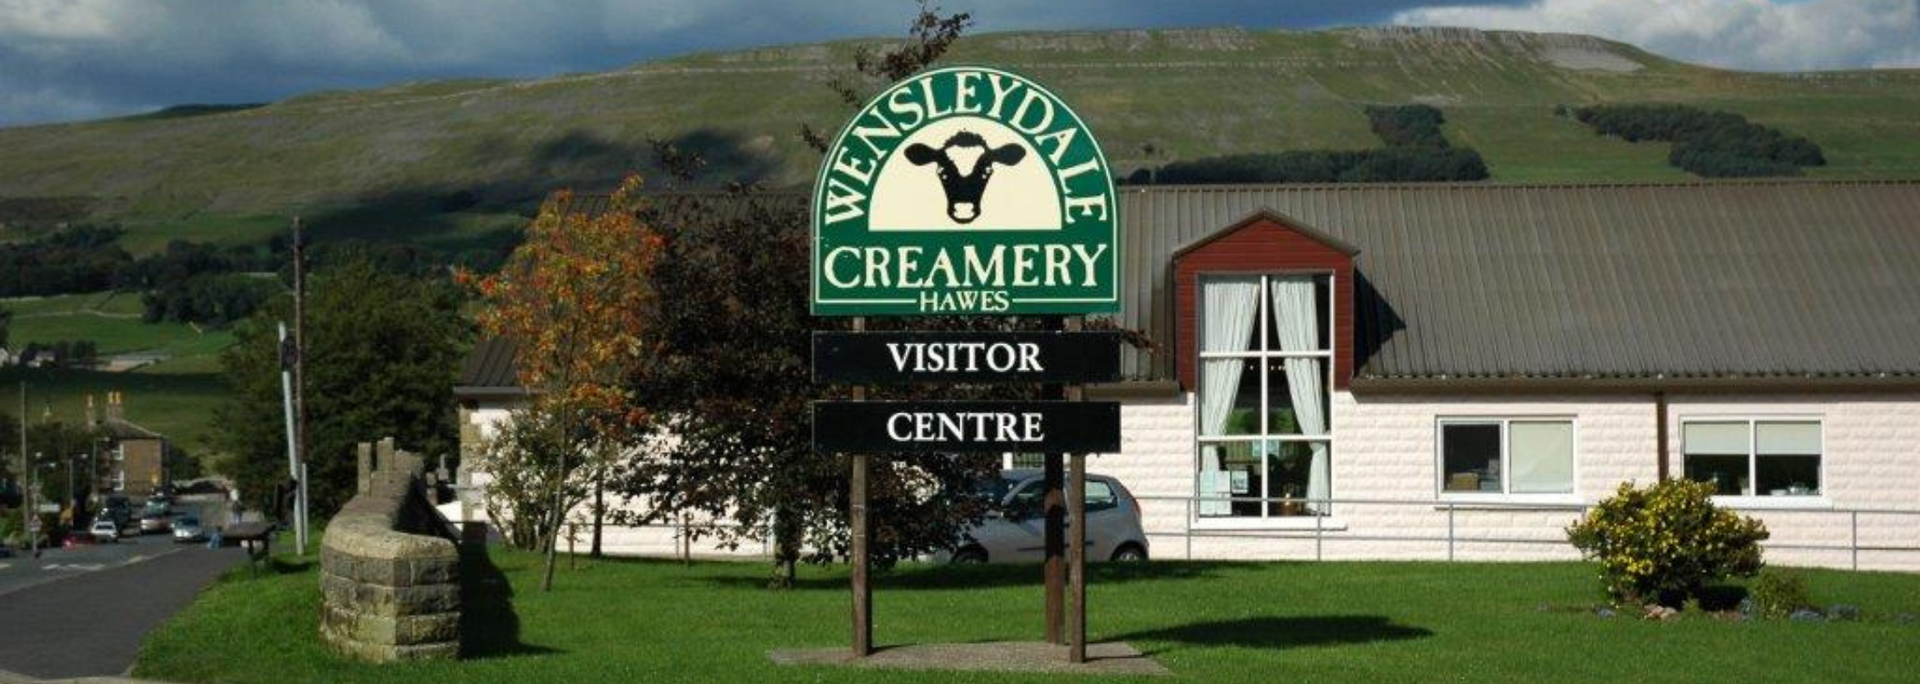 Picture of 1897 Coffee Shop or Wensleydale Creamery.